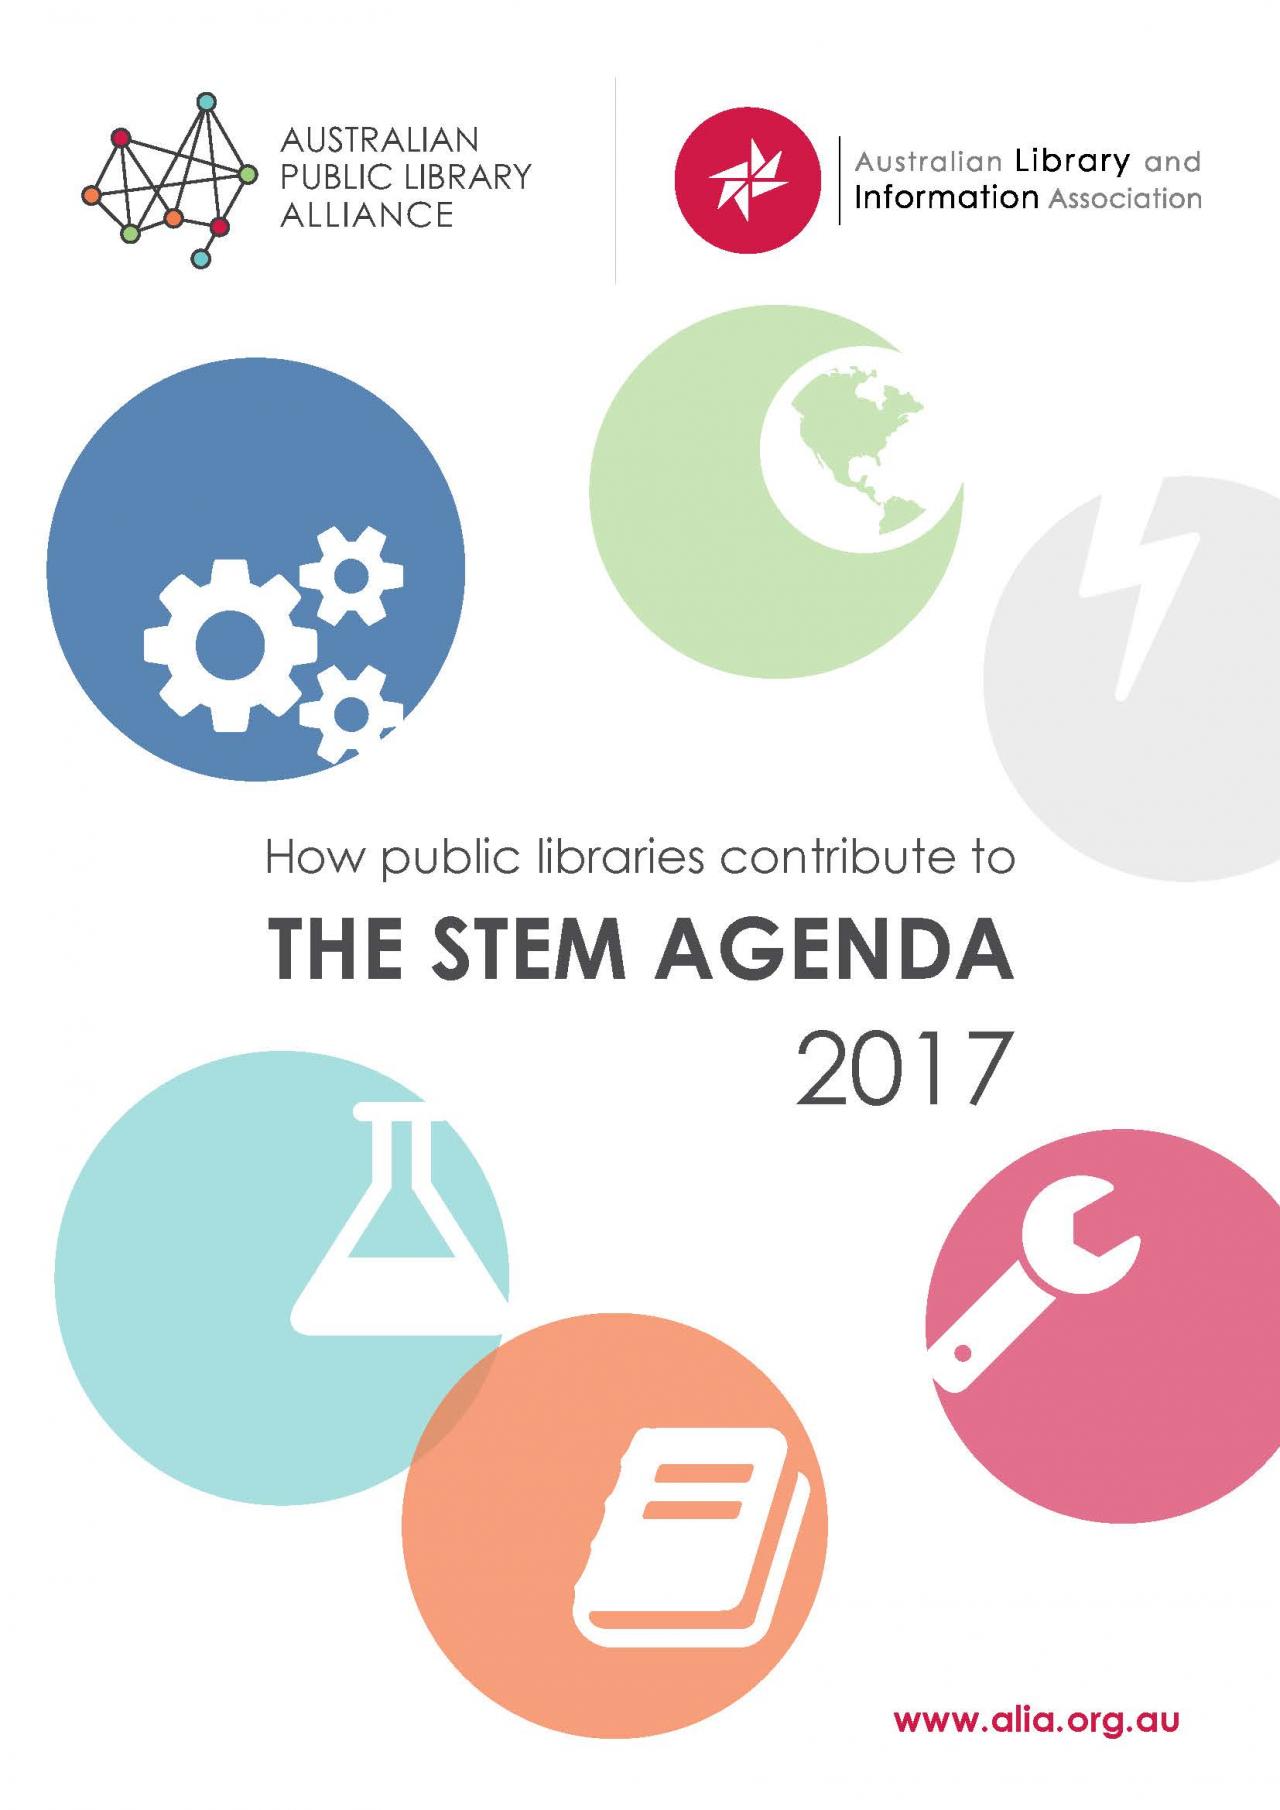 How public libraries contribute to the STEM agenda